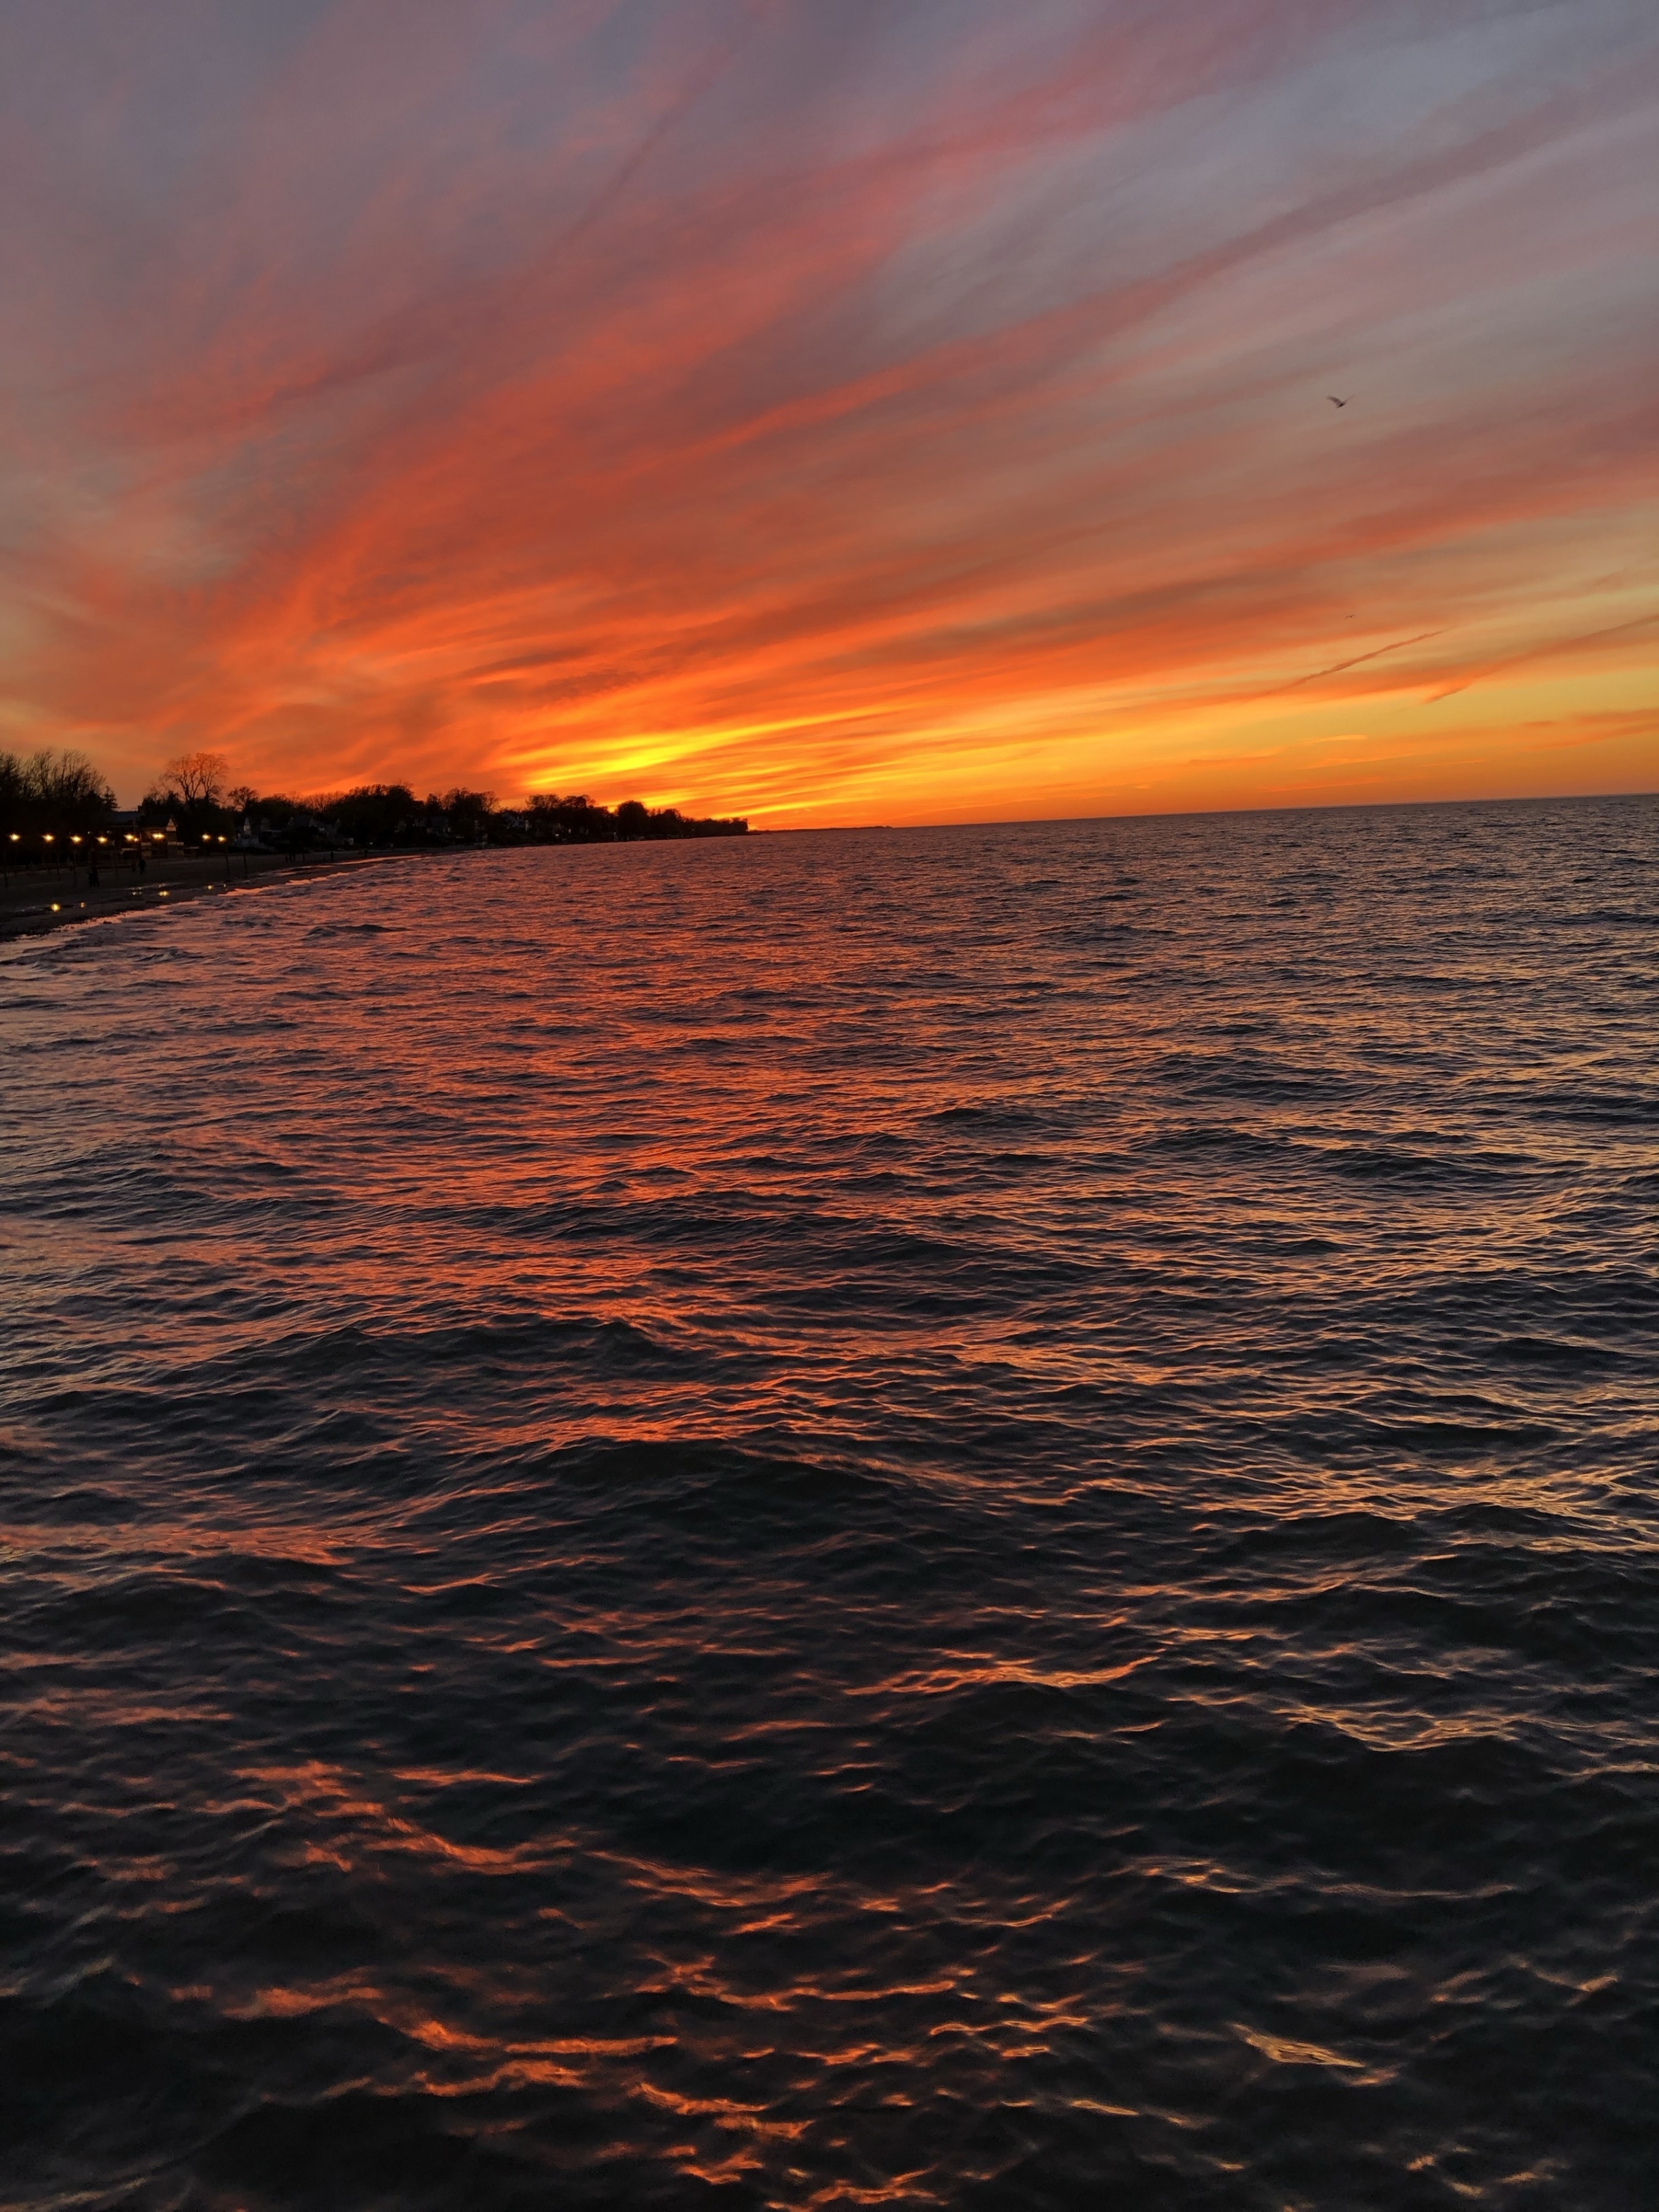 Watching the sunset from a pier in Lake Ontario near Rochester, New York #Adventure #sunset #LakeOntario #Lake #NewYork